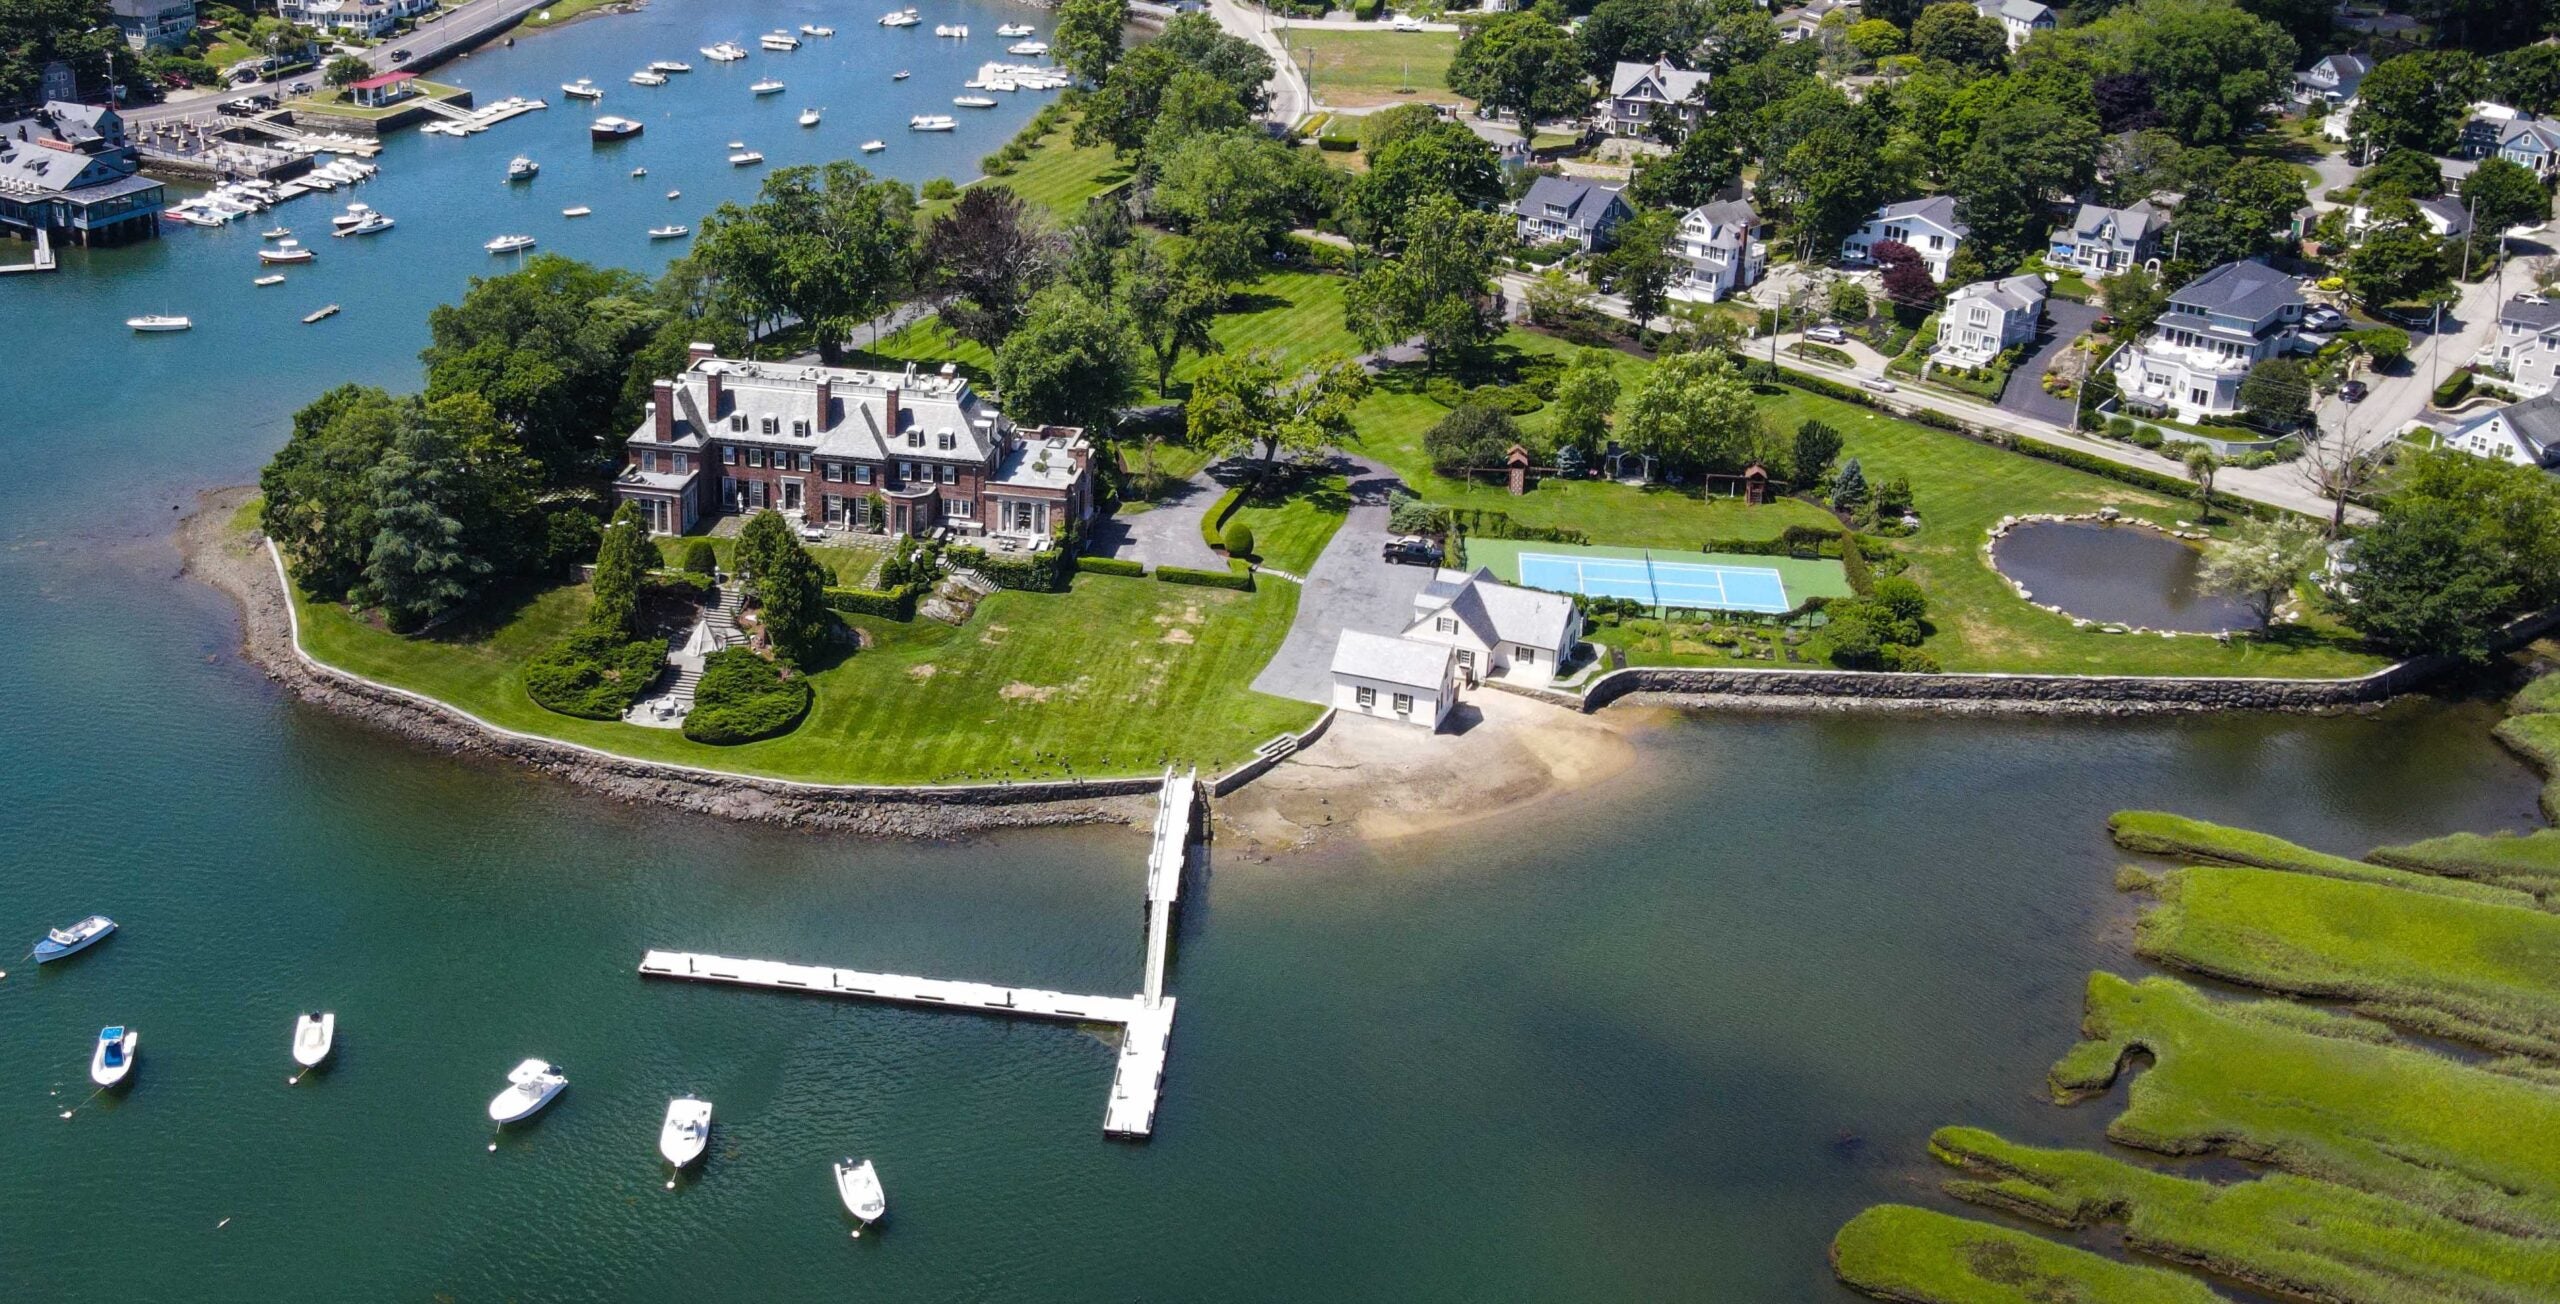 An aerial view of a Georgian estate in Cohasset with an expansive lawn, a long dock, a pool house, tennis courts, a skating pond, and sandy beachfront.